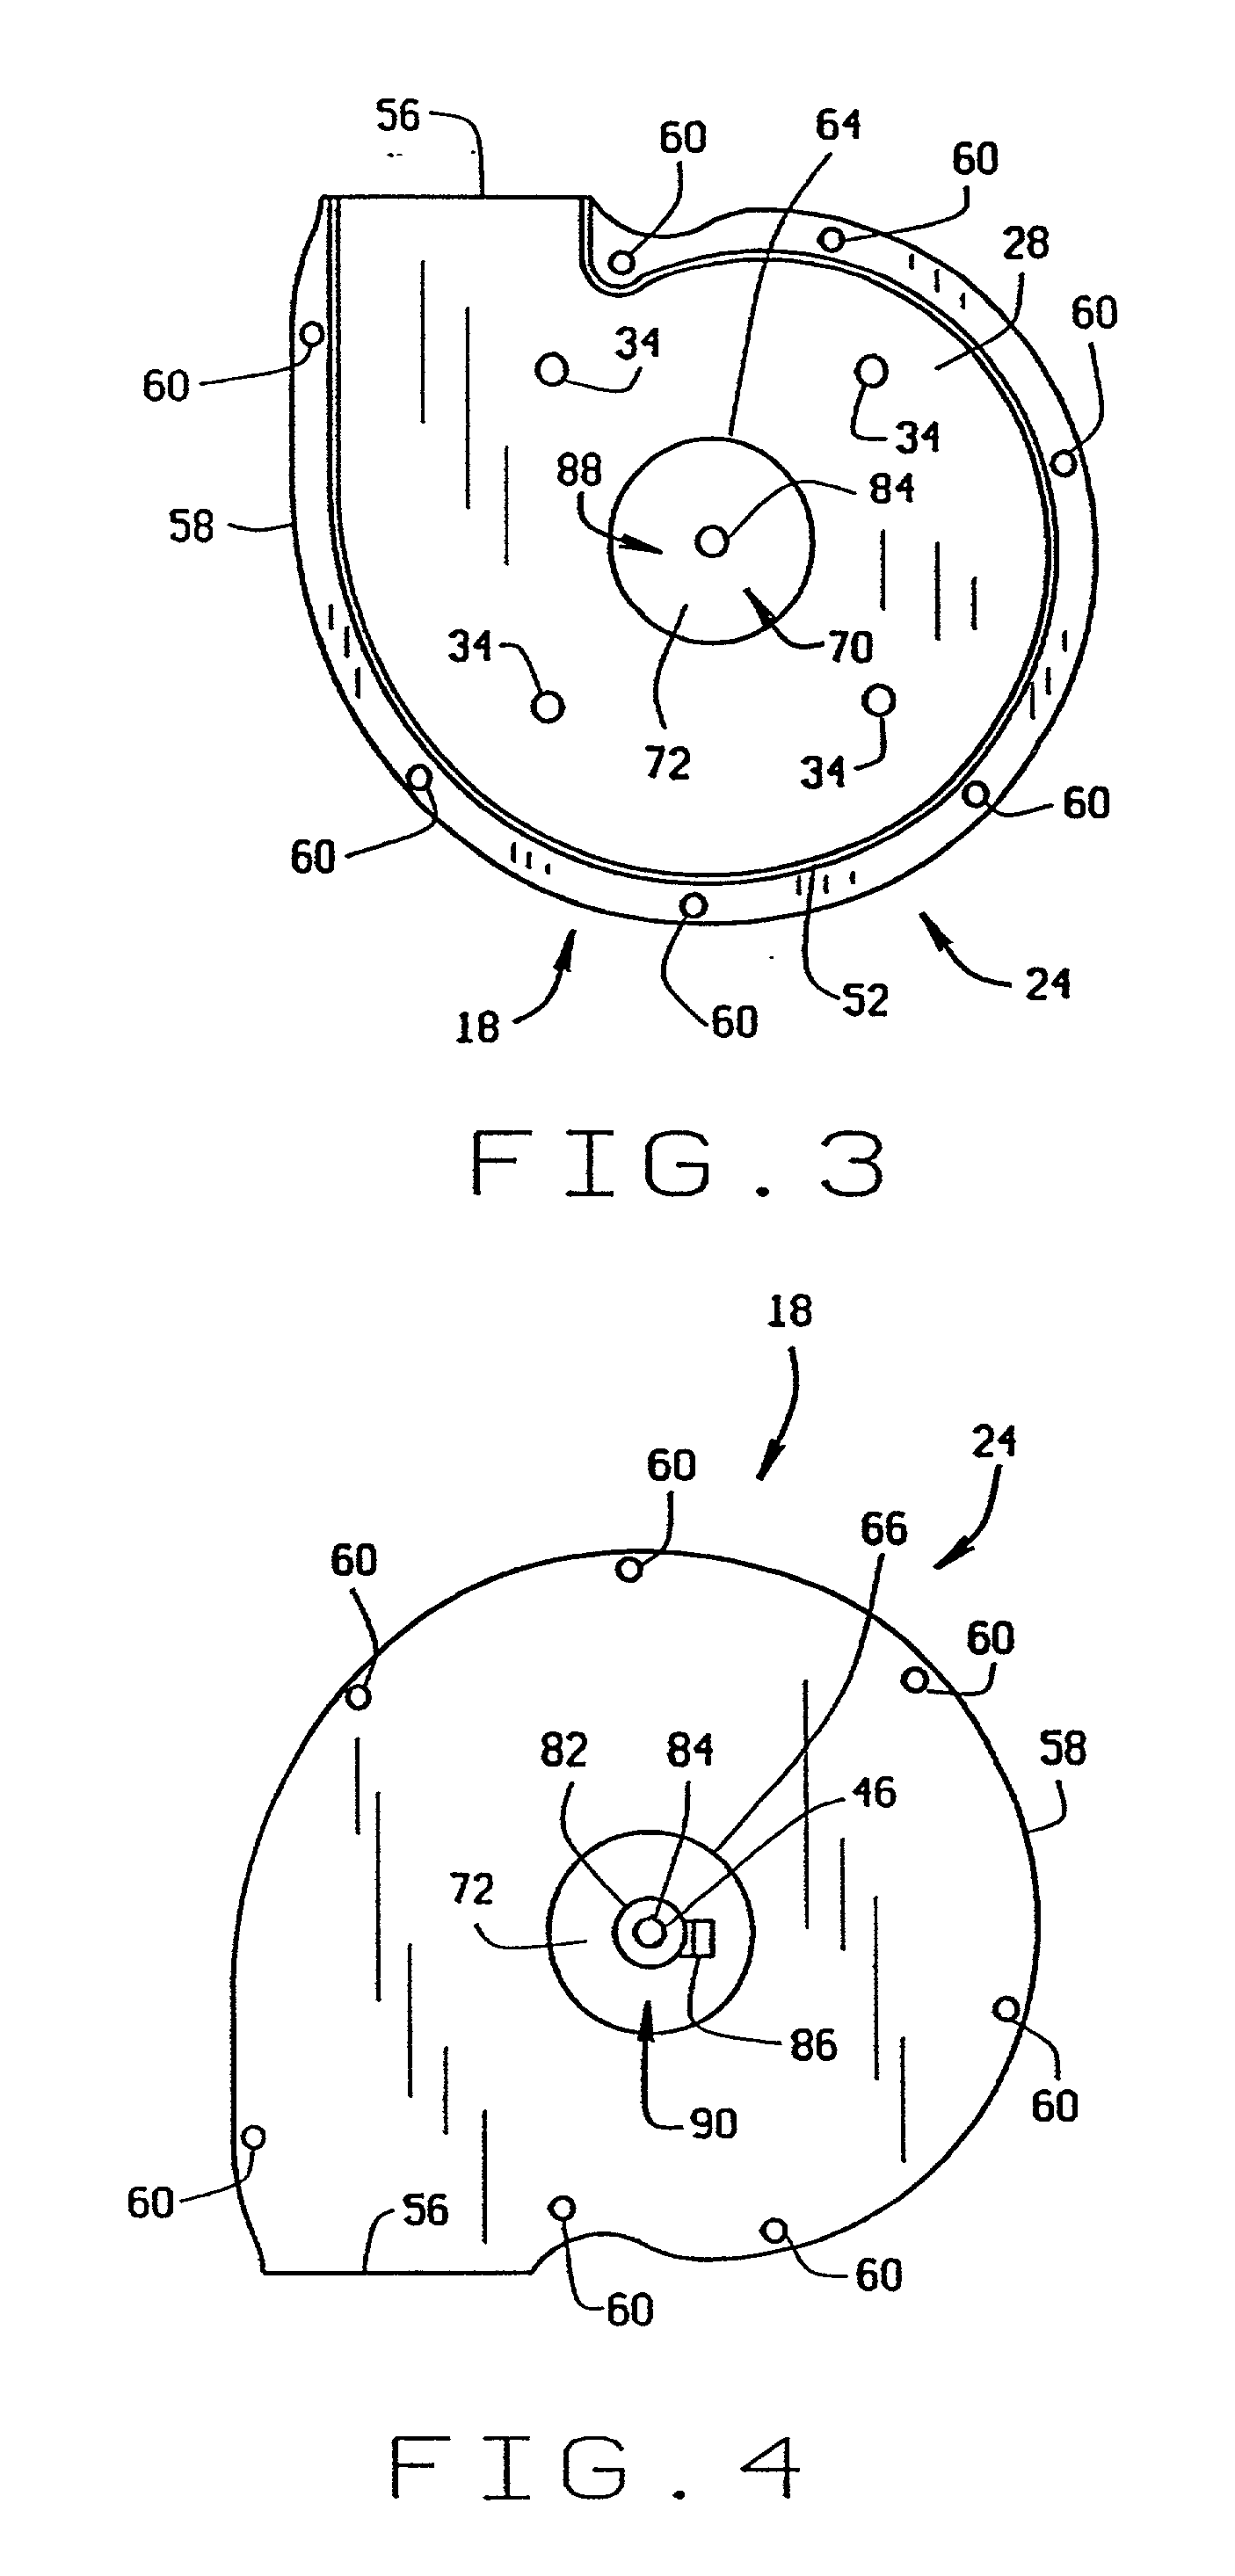 Apparatus for and method of operating a furnace blower to evaporate condensate within an exhaust flue